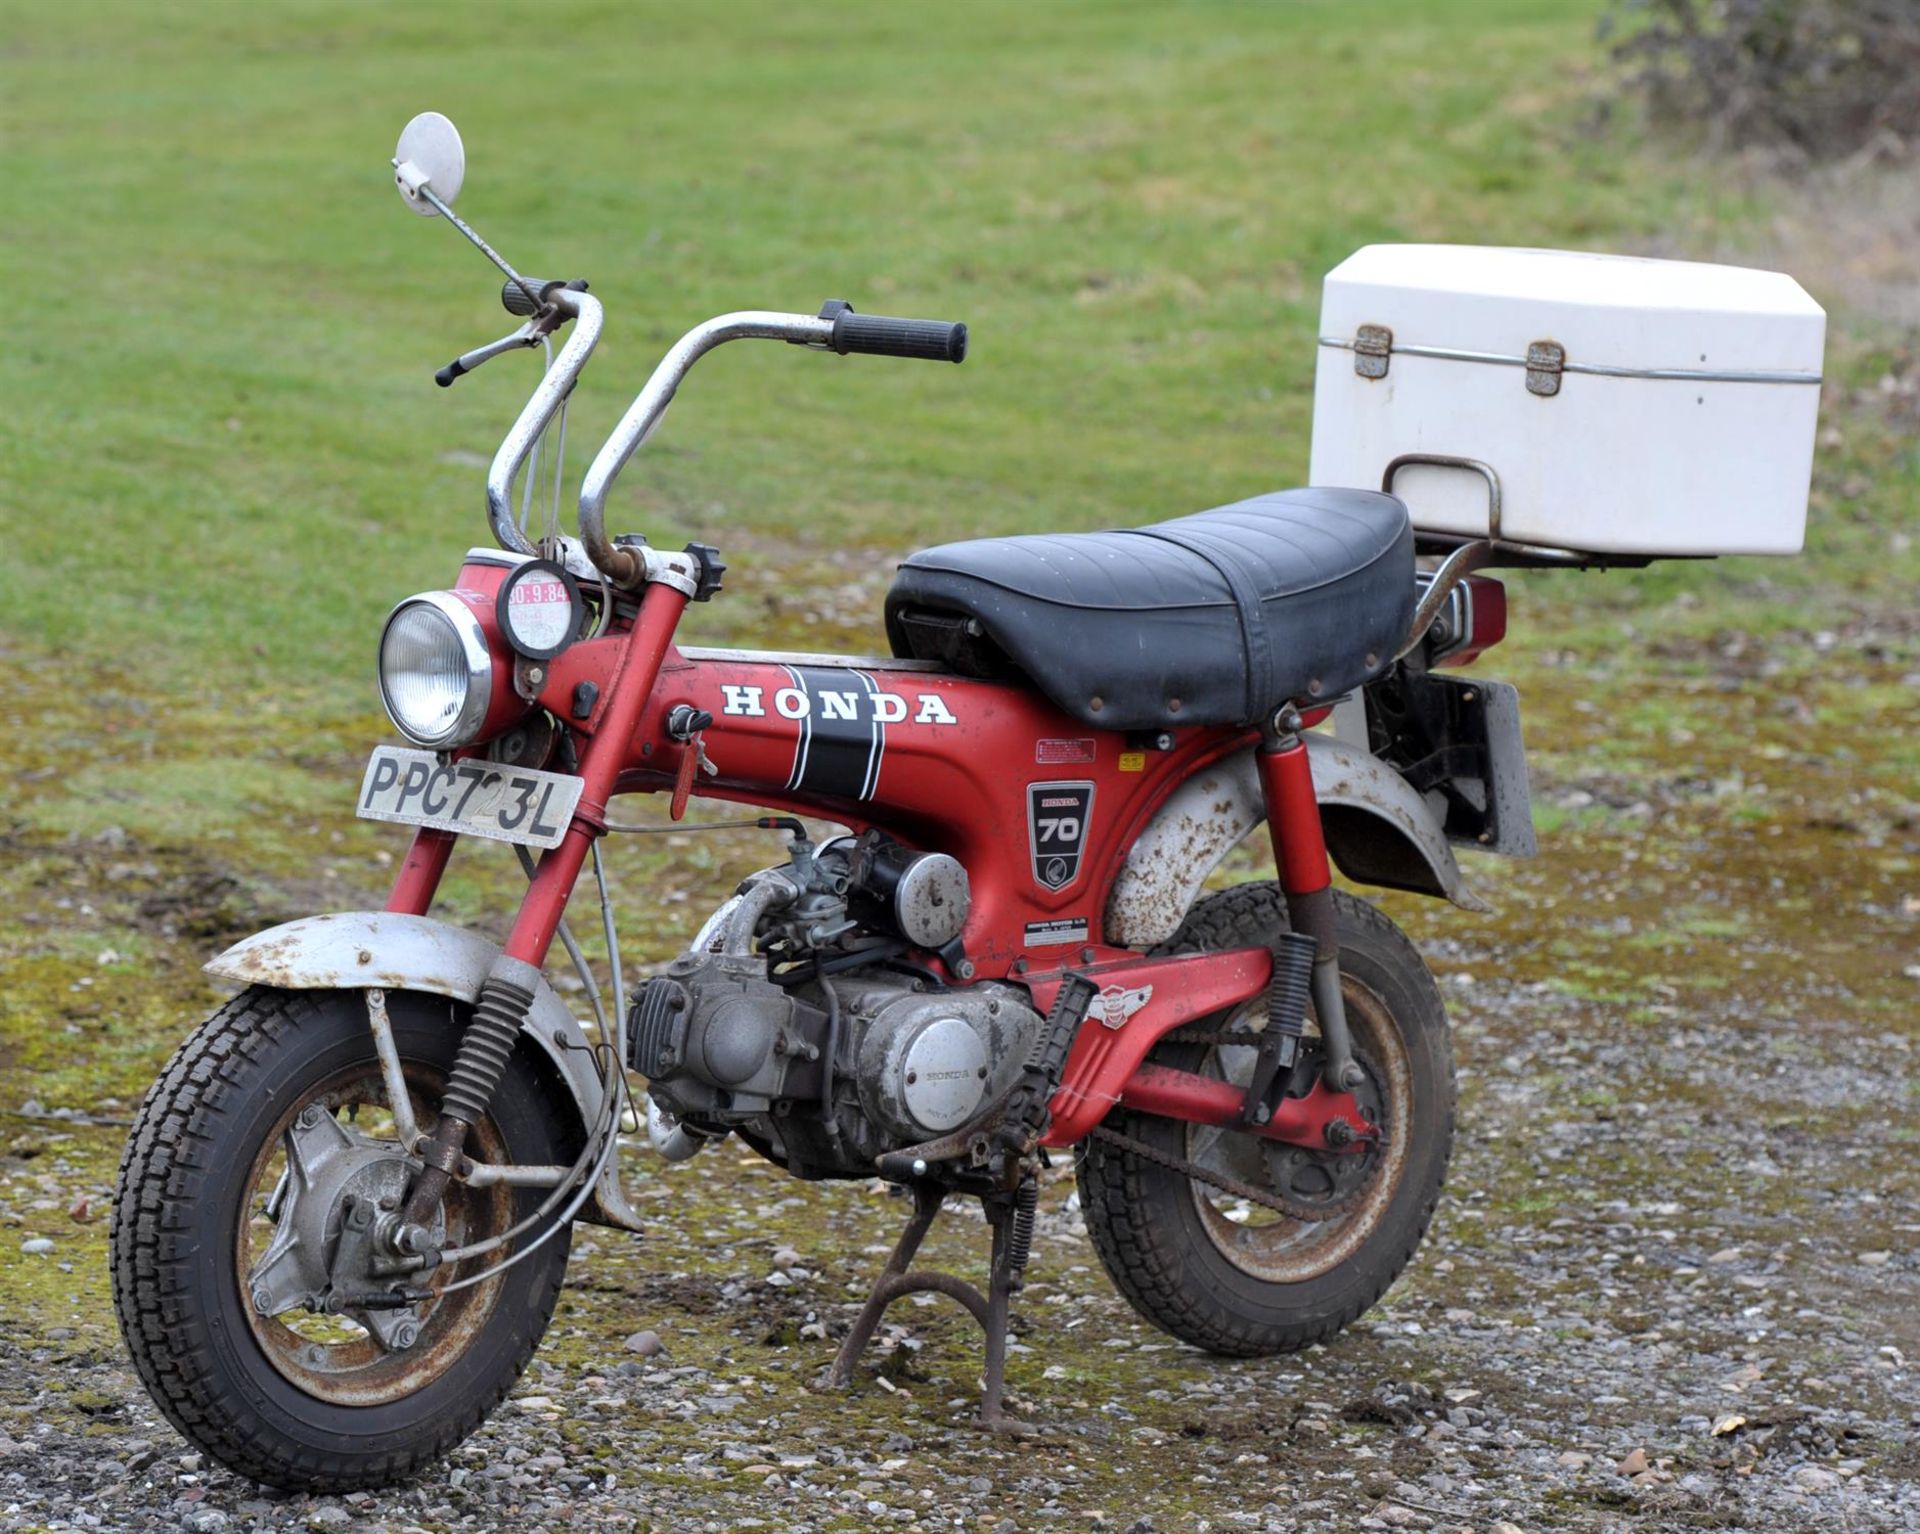 Motor Bike, Honda 70, Monkey Bike, red chassis. Registration number PPC 723L, comes with Original